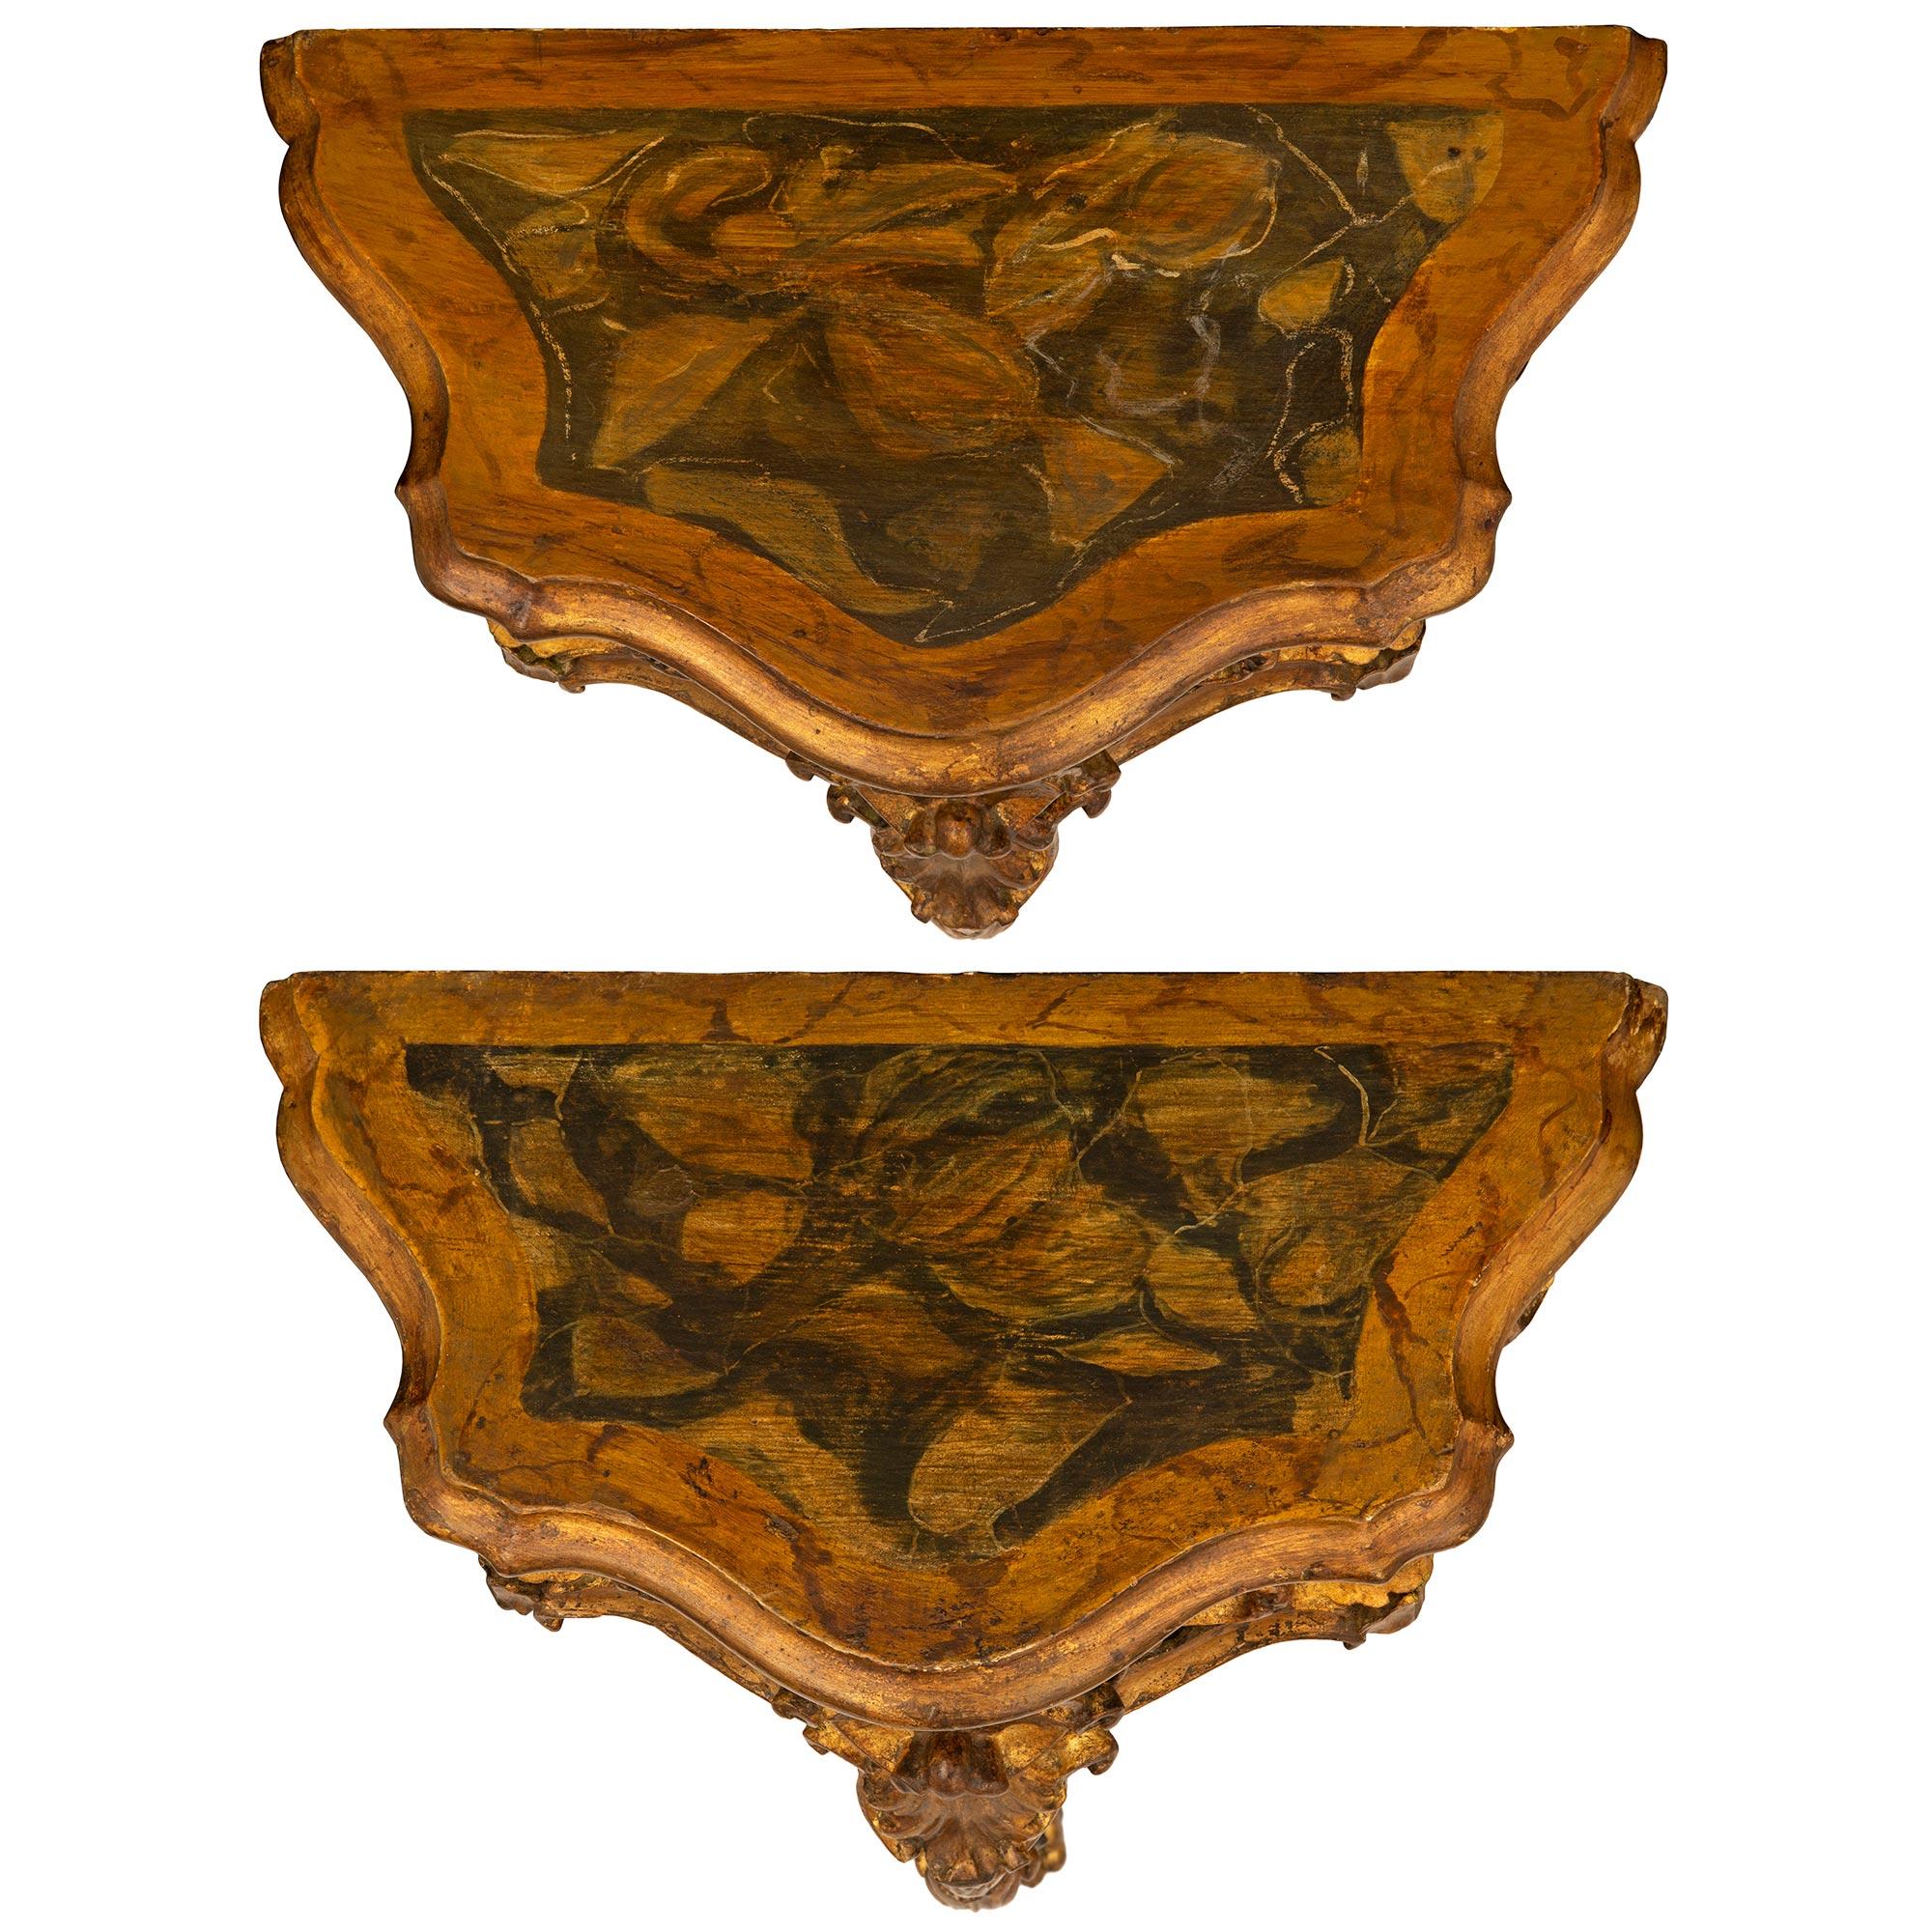 A beautiful and most decorative pair of Italian 19th century Venetian st. Mecca, polychrome and faux painted marble consoles. Each wall mounted console is raised by an elegantly scrolled single central leg with a handsome richly carved paw foot and